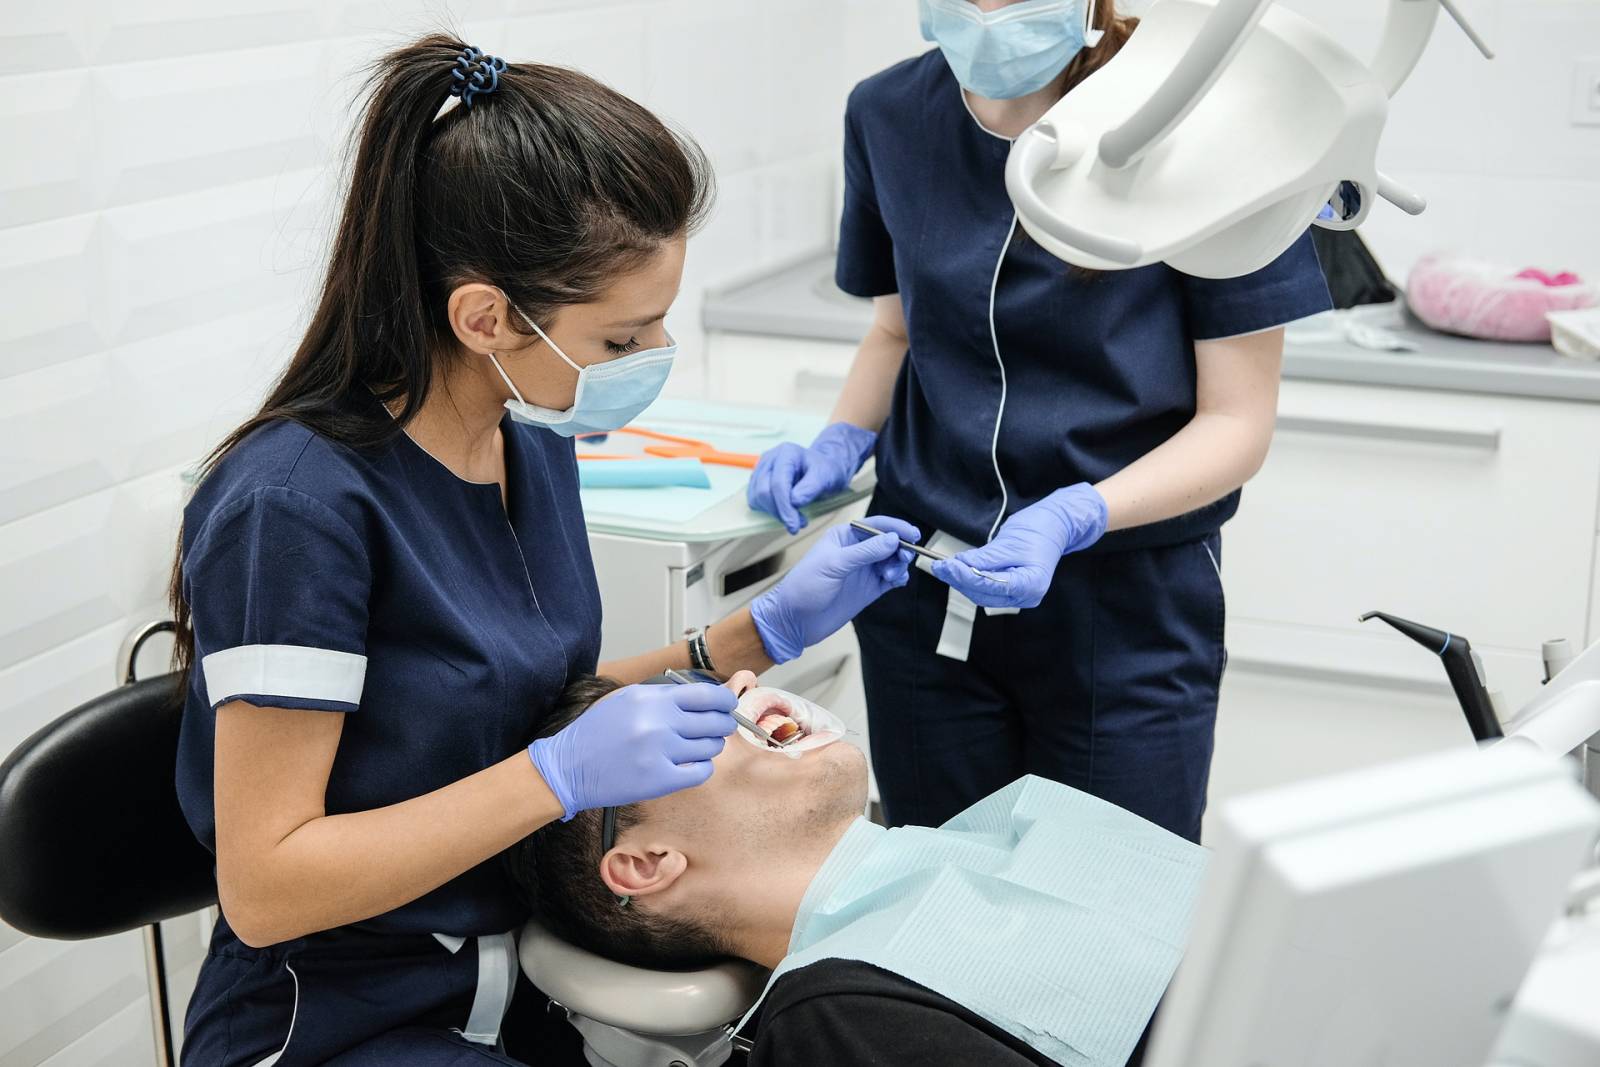 A dental nurse/dentist inspecting a lying patients mouth while another dental nures/dentist is handing an instrument to them.